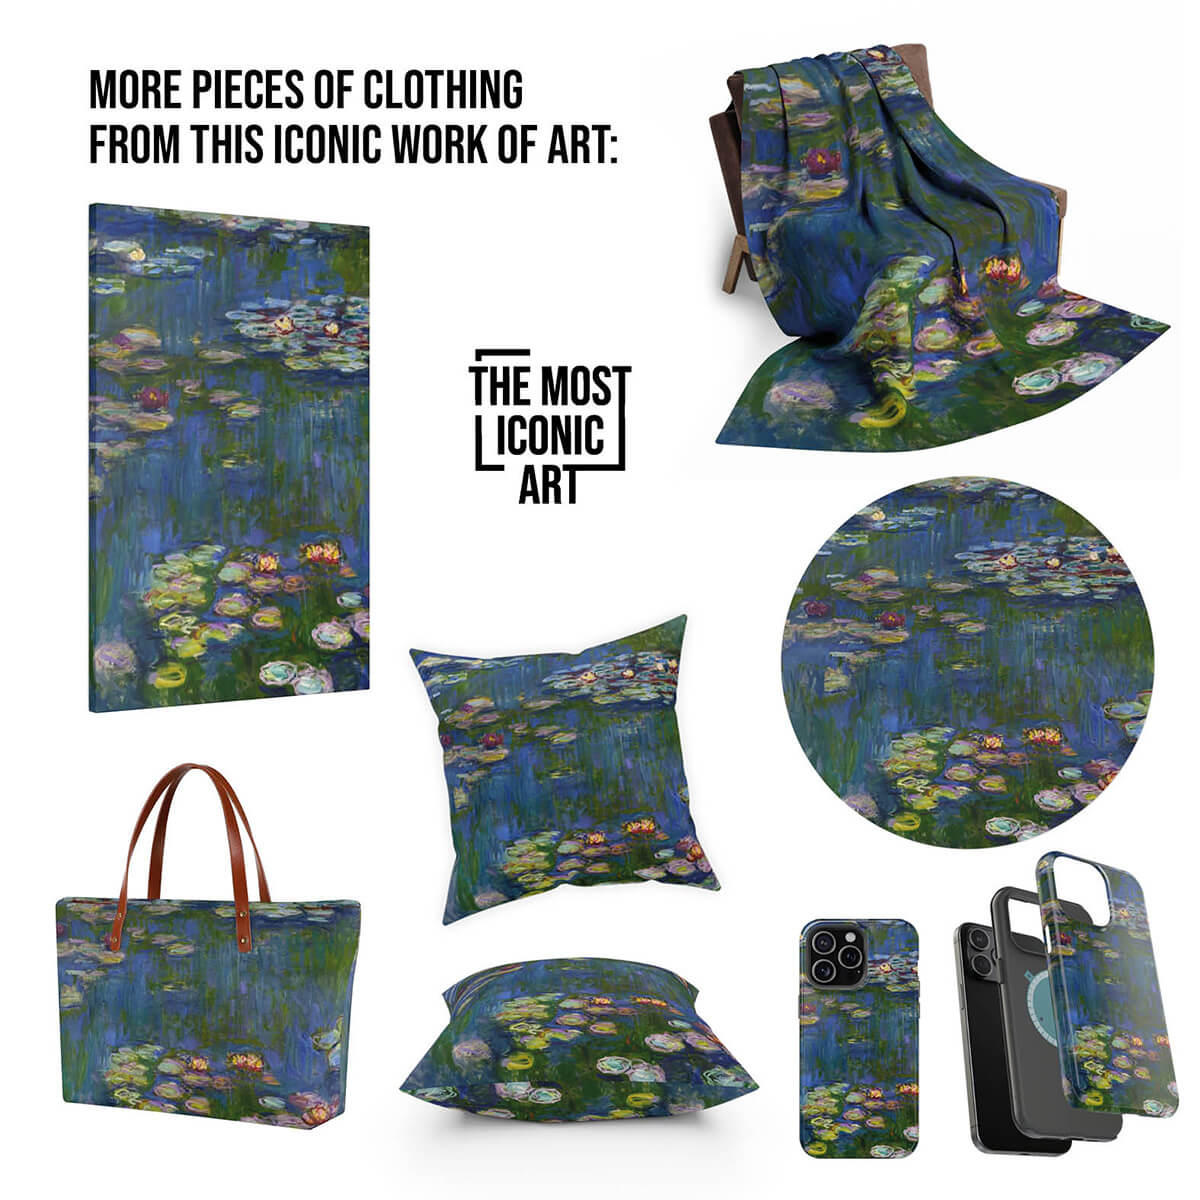 Artistic halter dress featuring Claude Monet's iconic Water Lilies artwork